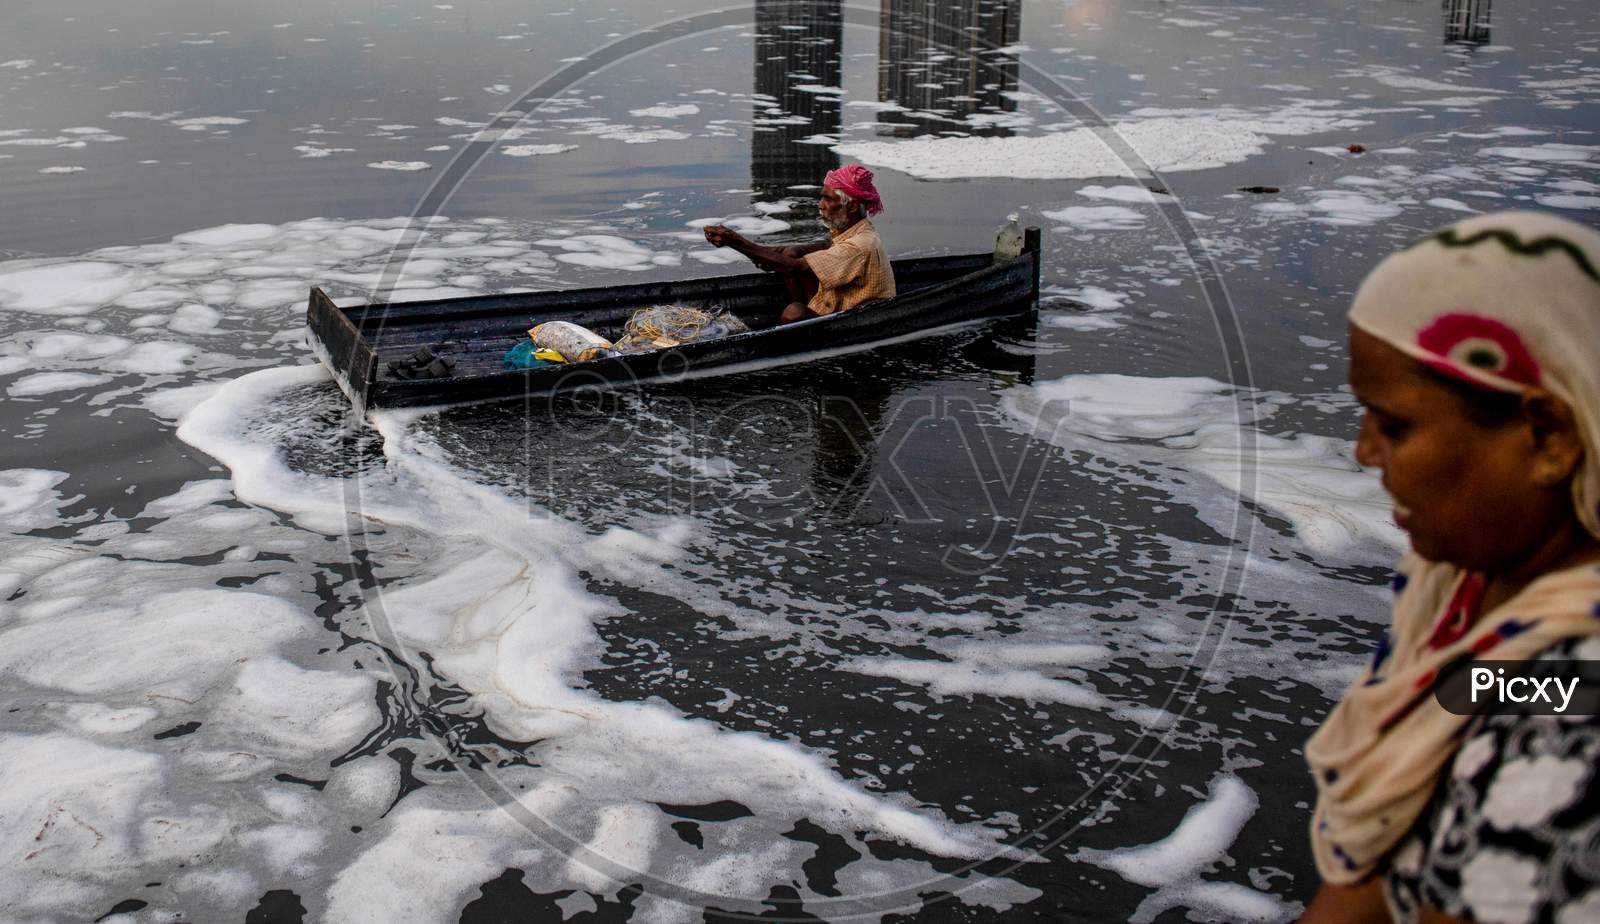 An Indian Fisherman Rows His Boat In The Polluted Water Of The Yamuna River On July 30, 2020 In New Delhi, India